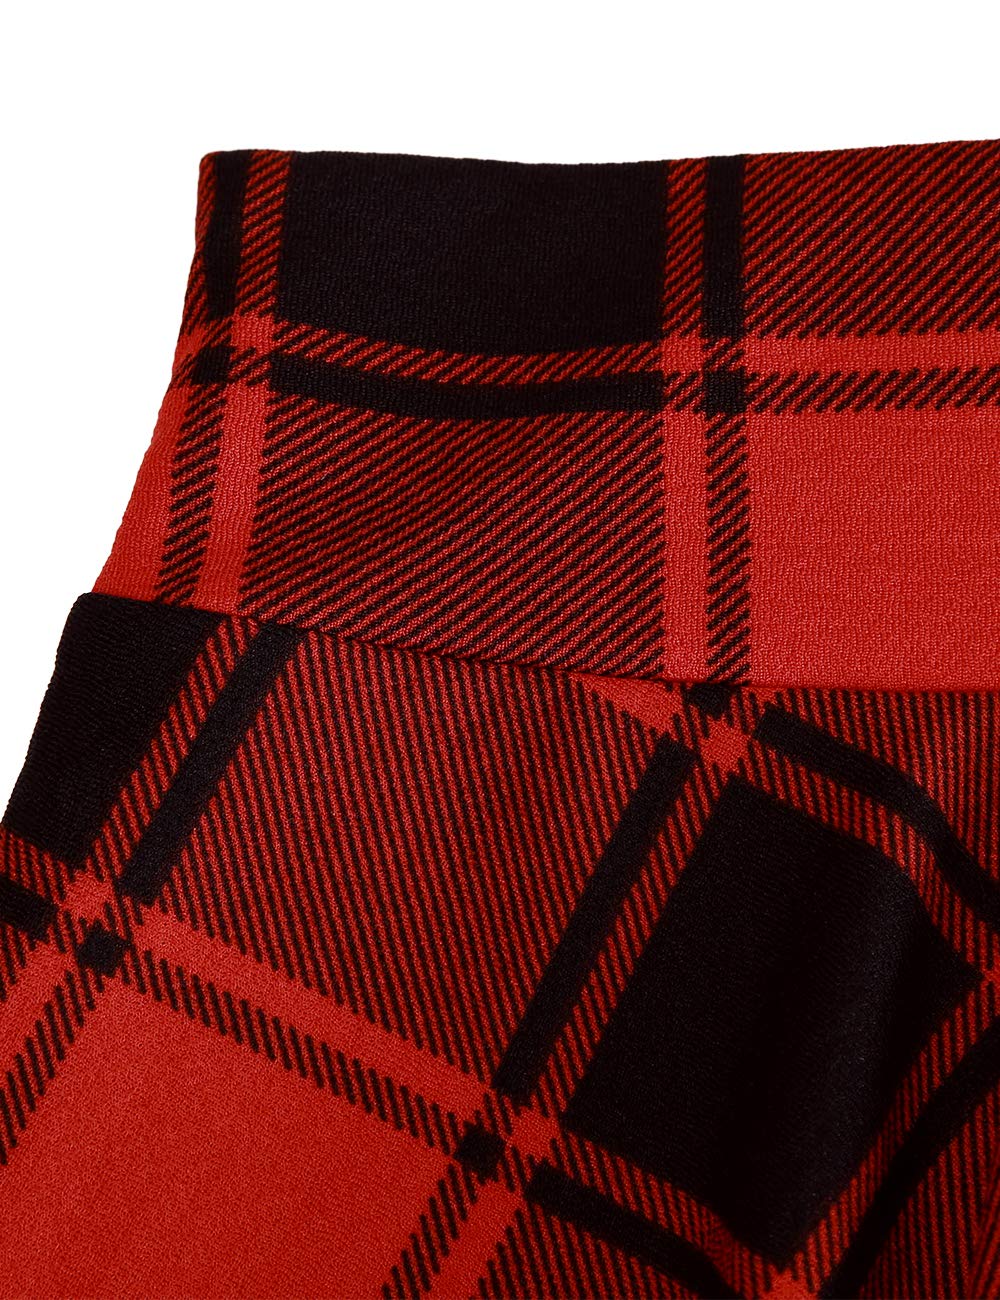 DJT Flared Pleated Red Black Plaid Women's Casual Stretchy Mini Skater Skirt with Shorts